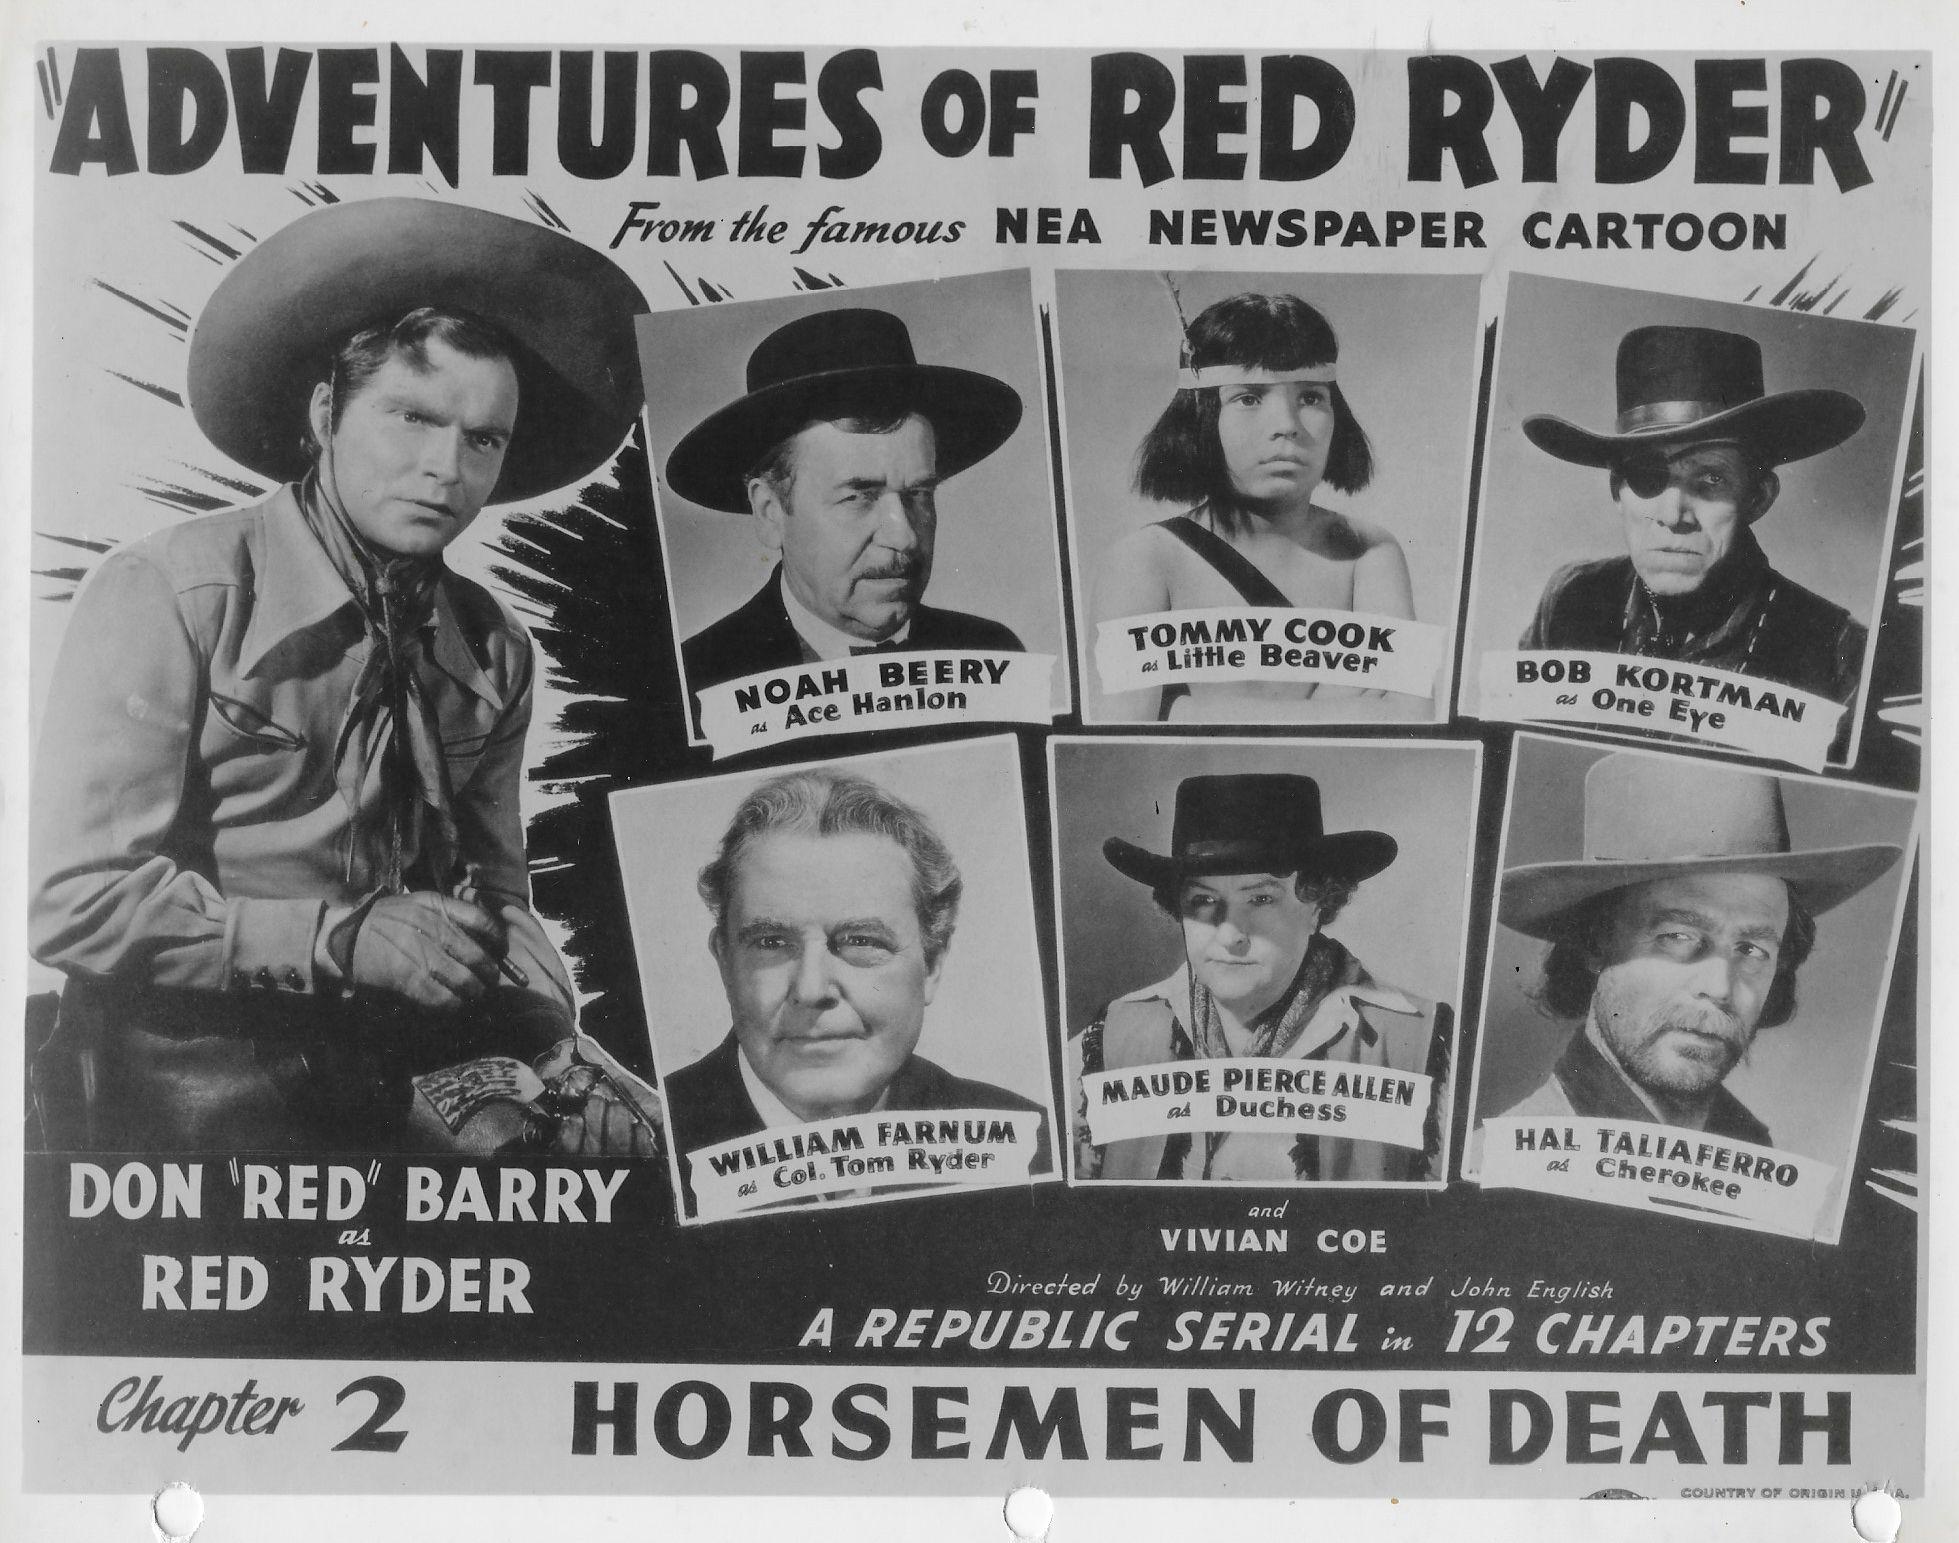 noah-beery-maude-allen-don-red-barry-tommy-cook-william-farnum-bob-kortman-and-hal-taliaferro-in-adventures-of-red-ryder-1940